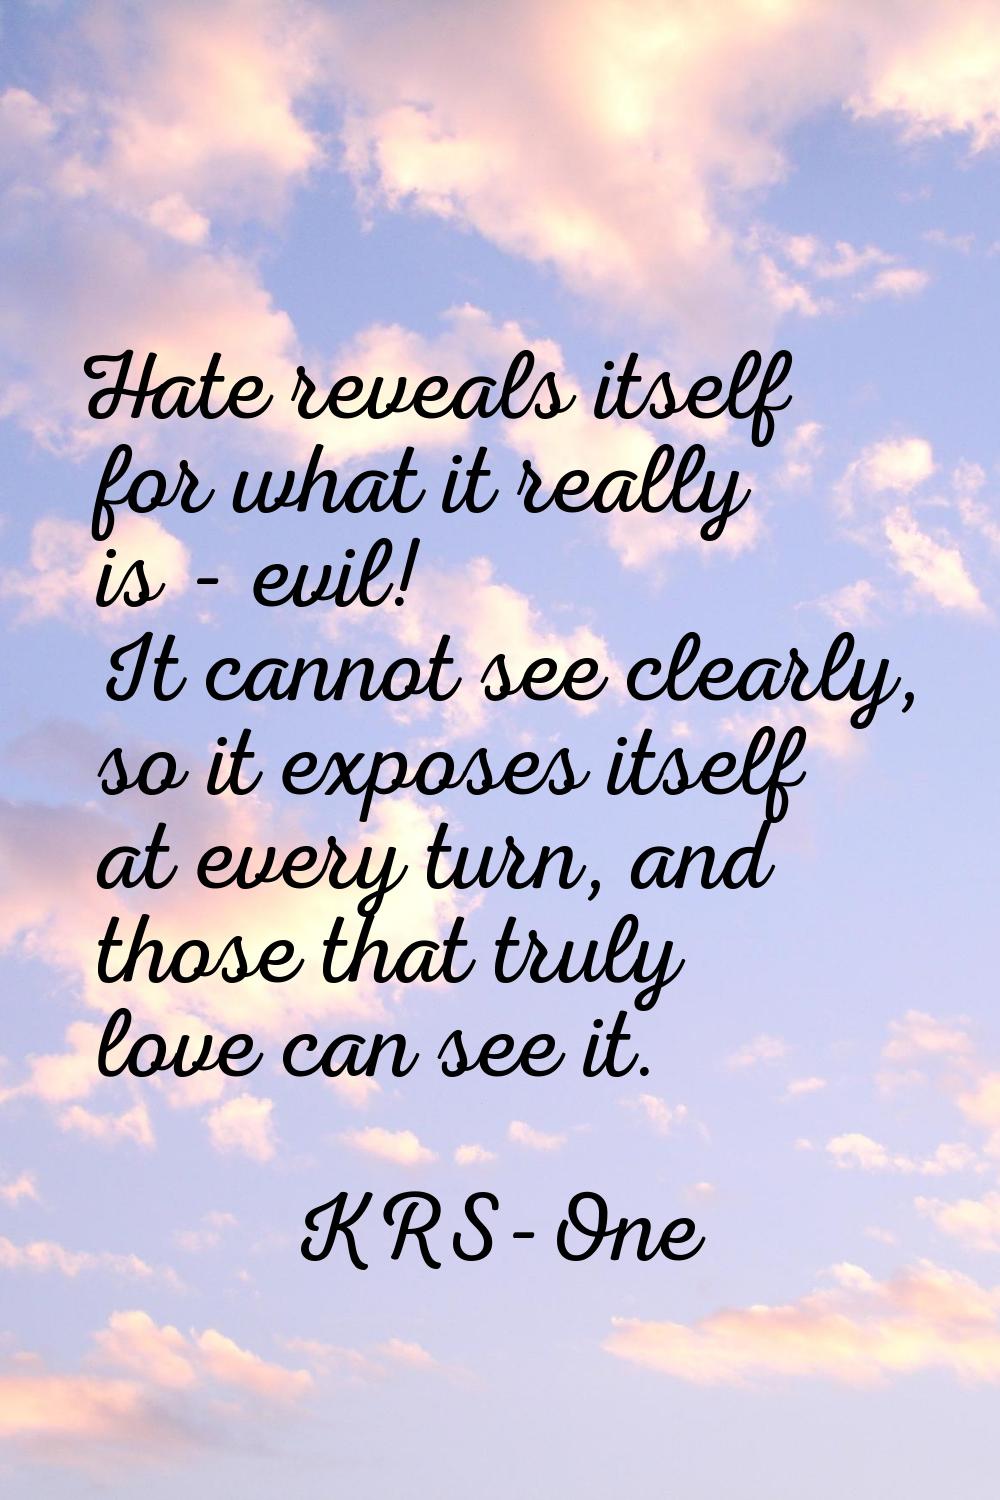 Hate reveals itself for what it really is - evil! It cannot see clearly, so it exposes itself at ev